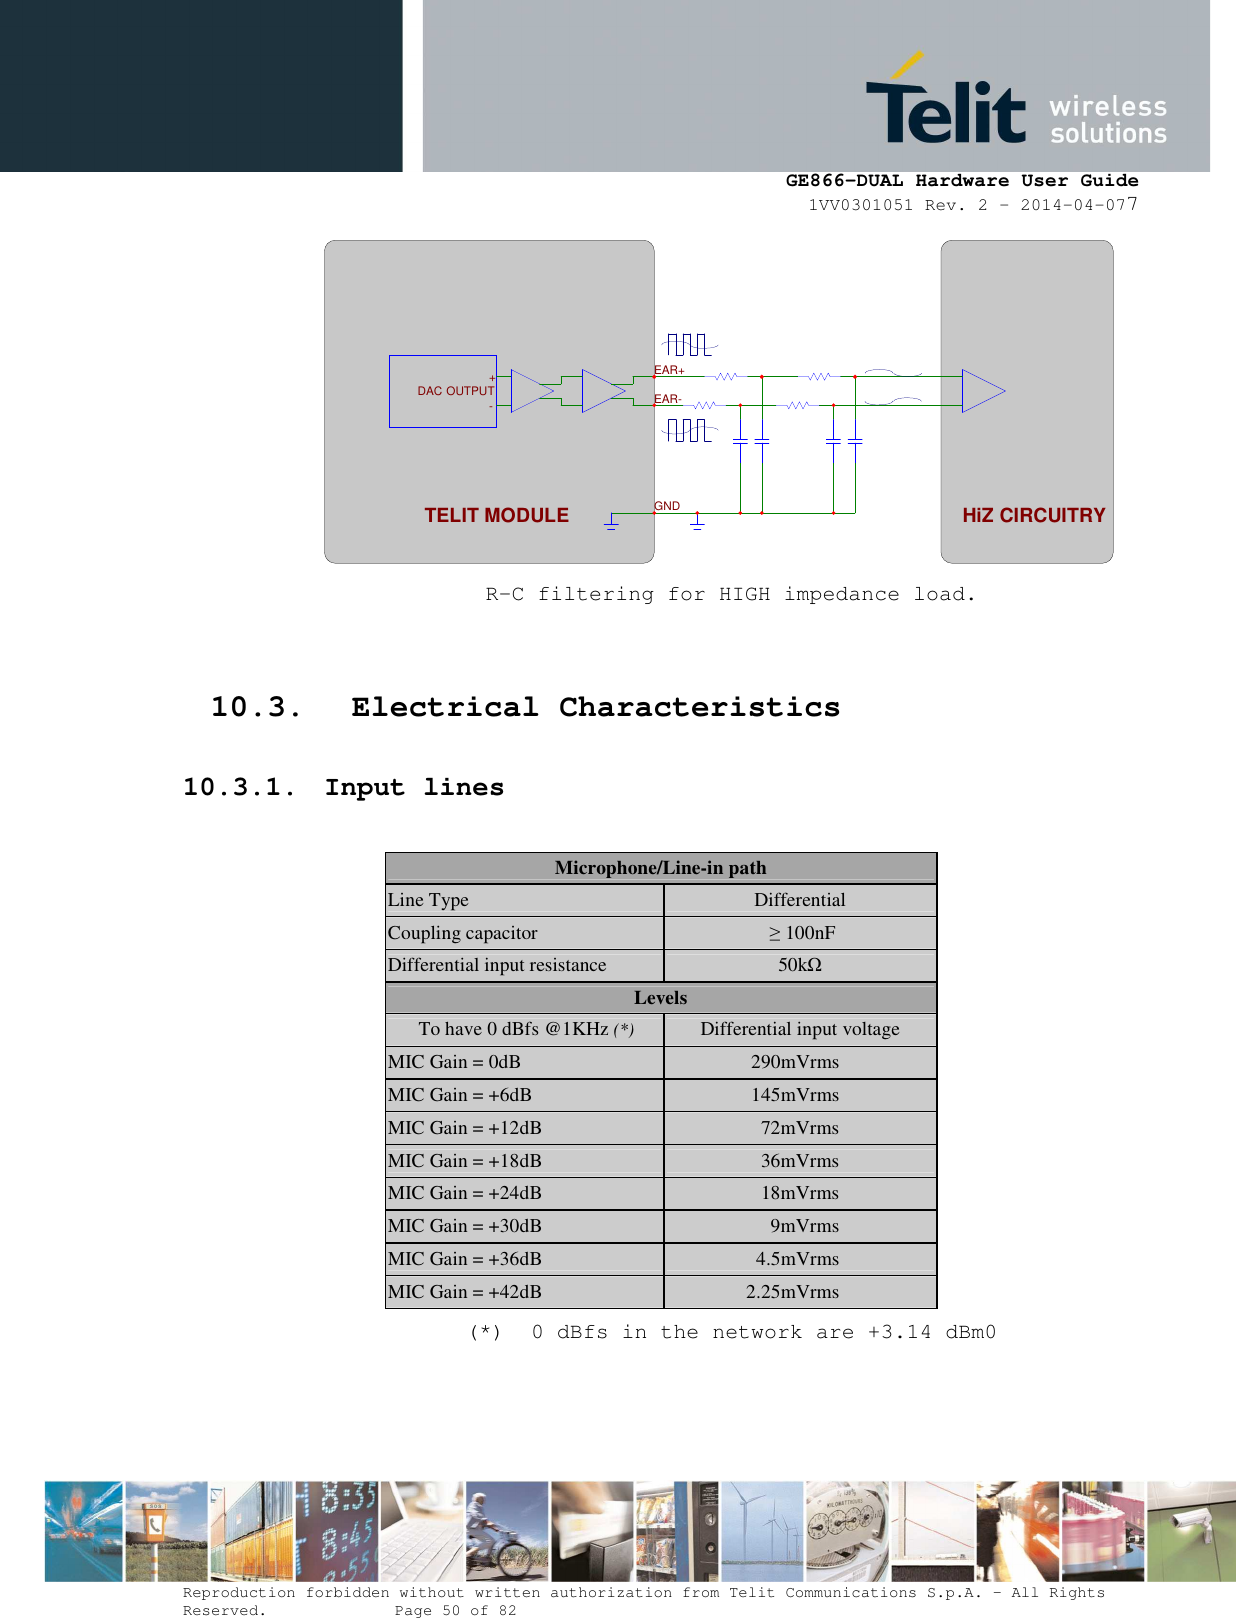      GE866-DUAL Hardware User Guide 1VV0301051 Rev. 2 – 2014-04-077  Reproduction forbidden without written authorization from Telit Communications S.p.A. - All Rights Reserved.    Page 50 of 82 Mod. 0805 2011-07 Rev.2  R-C filtering for HIGH impedance load.  10.3. Electrical Characteristics 10.3.1. Input lines  Microphone/Line-in path Line Type  Differential Coupling capacitor  ≥ 100nF Differential input resistance  50kΩ Levels To have 0 dBfs @1KHz (*) Differential input voltage MIC Gain = 0dB    290mVrms MIC Gain = +6dB    145mVrms MIC Gain = +12dB    72mVrms MIC Gain = +18dB    36mVrms MIC Gain = +24dB    18mVrms MIC Gain = +30dB    9mVrms MIC Gain = +36dB    4.5mVrms MIC Gain = +42dB    2.25mVrms (*)  0 dBfs in the network are +3.14 dBm0  EAR+EAR- TELIT MODULE-+ OUTPUTDACGNDHiZ CIRCUITRY